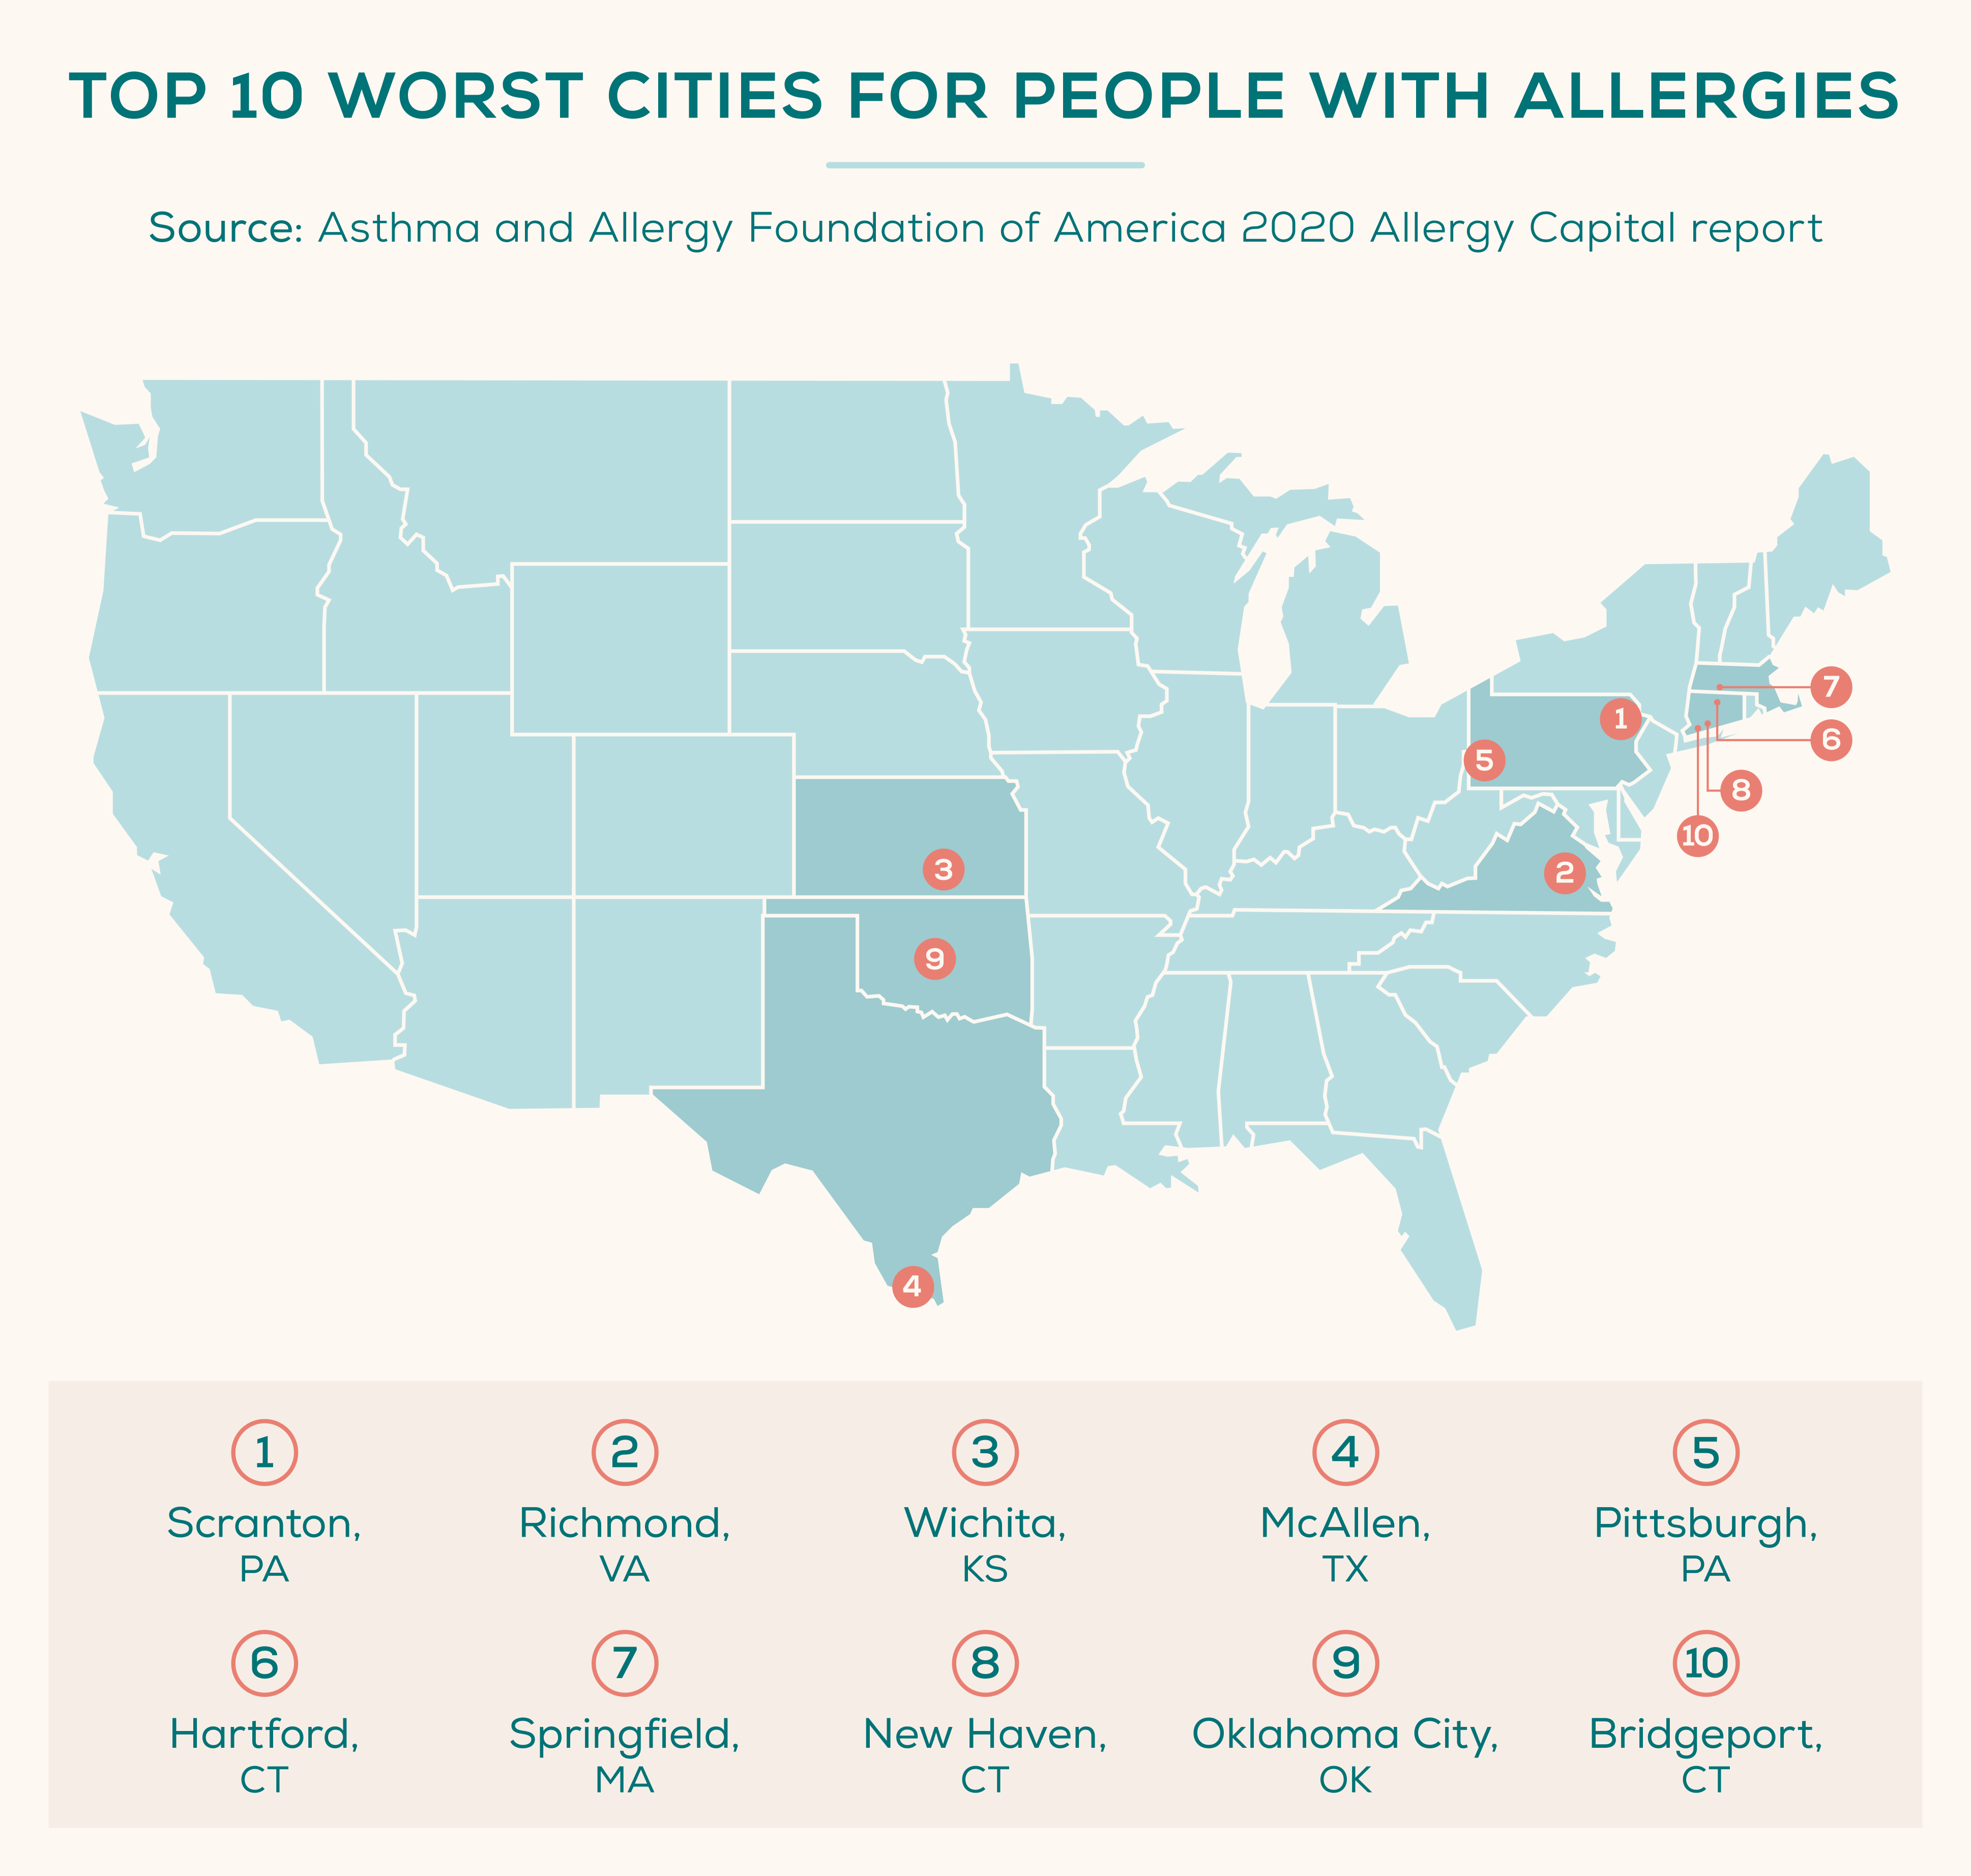 2021 Guide to the Worst Cities for People with Allergies Blog